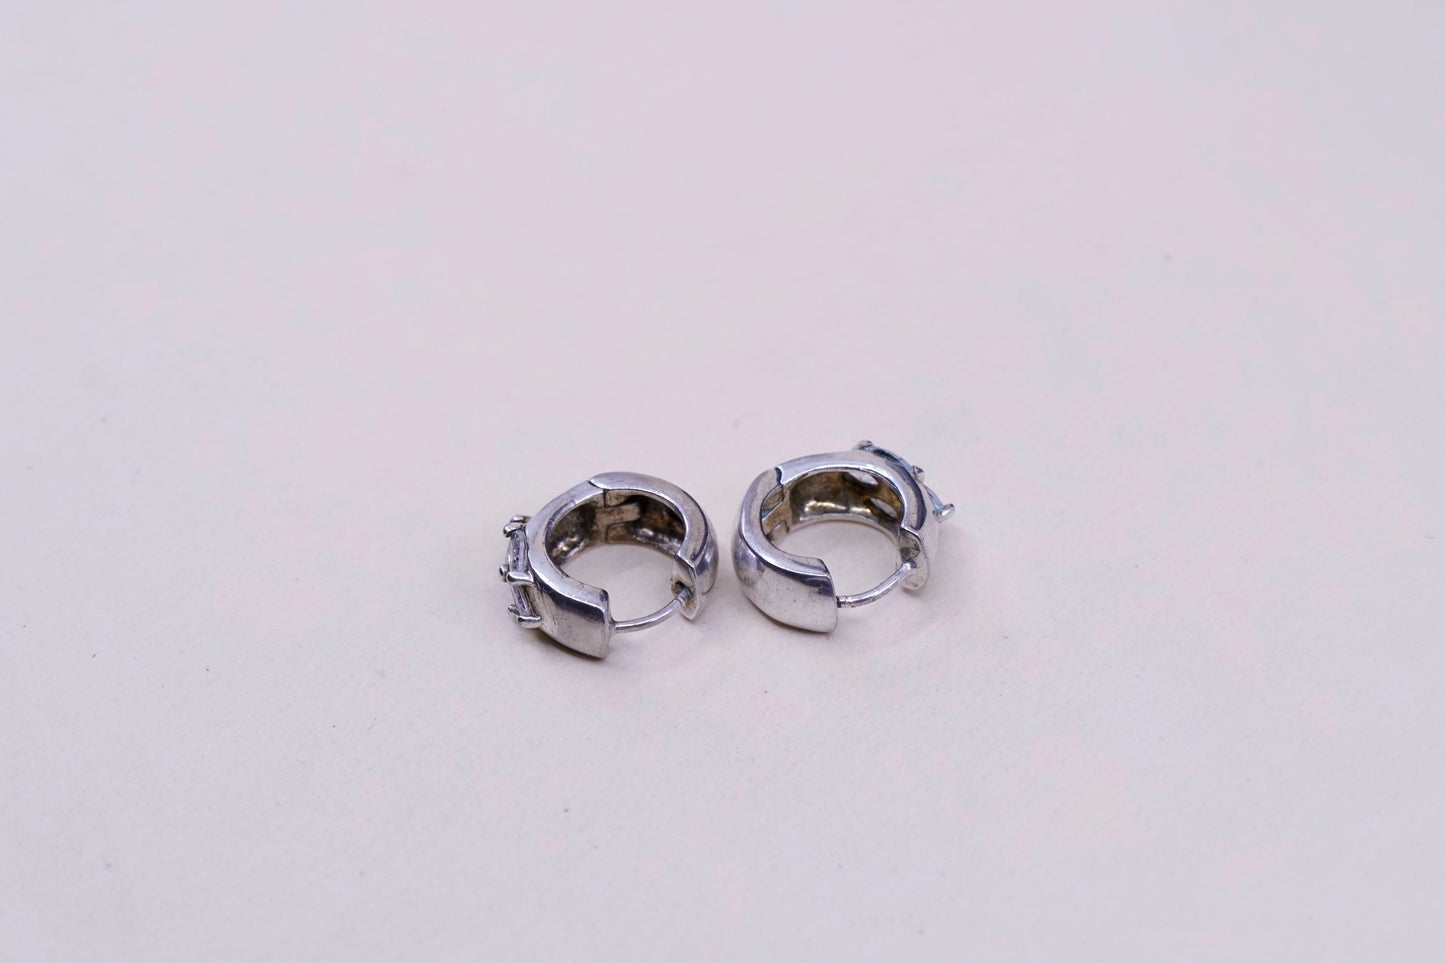 0.5”, fashion sterling silver earrings, 925 silver hoops, Huggie with clear Cz